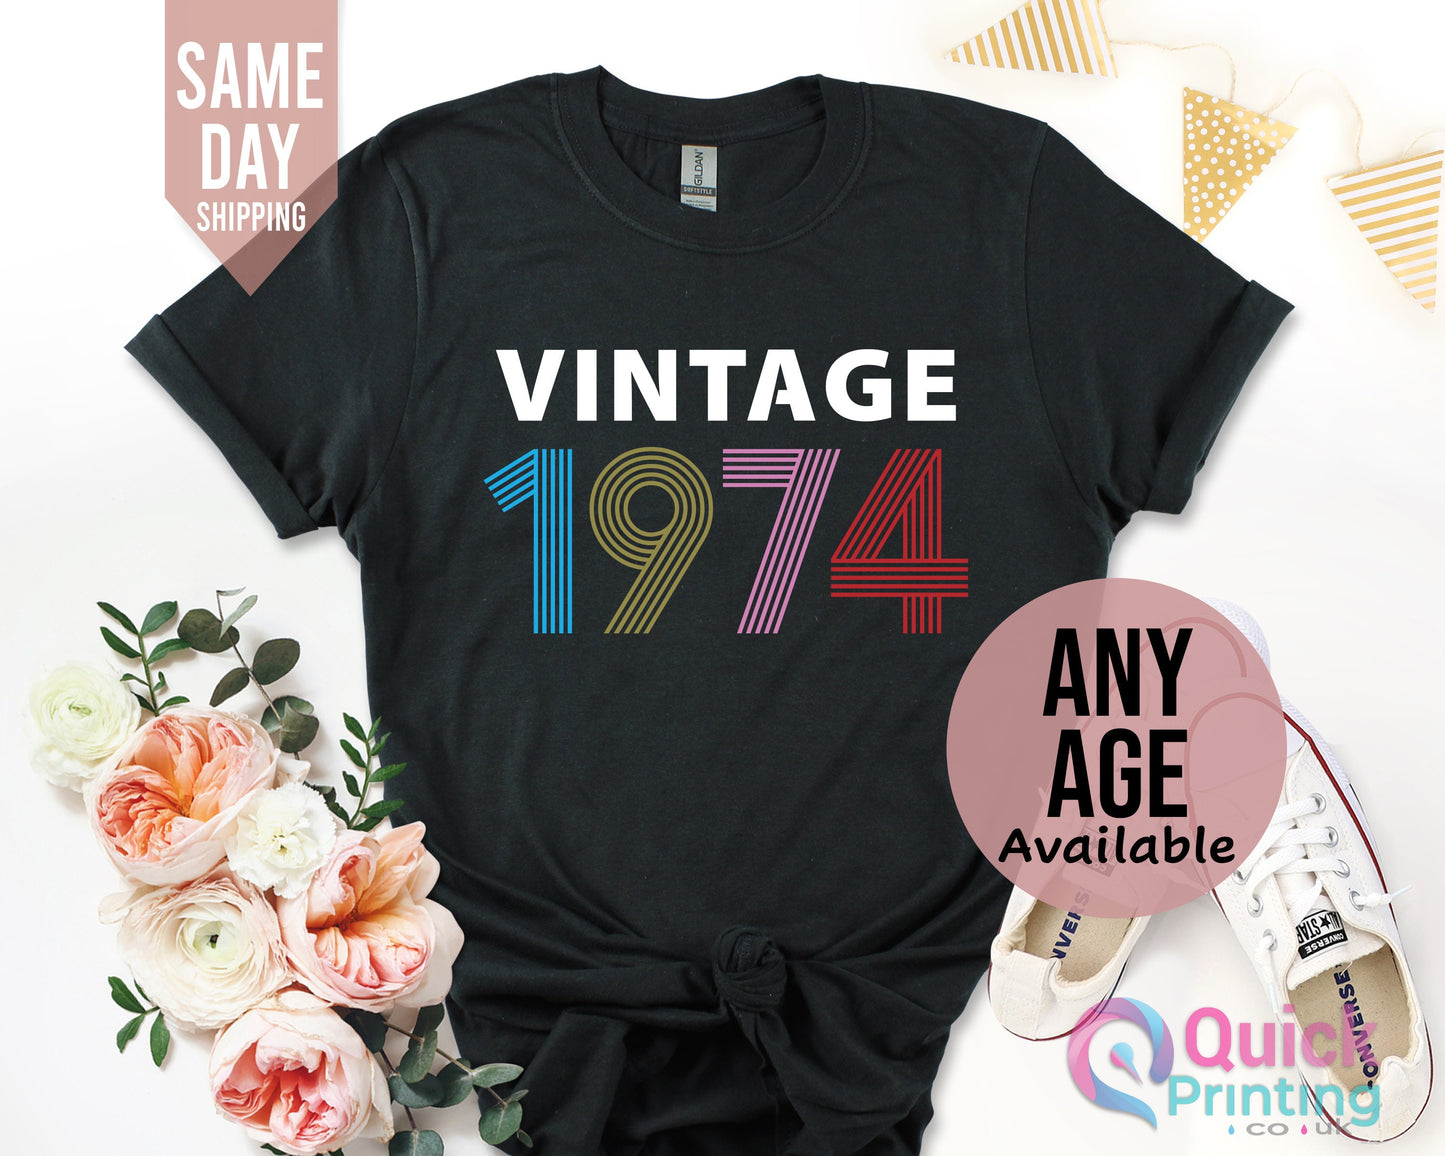 1974 Birthday TShirt UK, 50th Birthday Gifts for Women, 50th Birthday Tshirt, Vintage 1974 Birthday Shirt, Birthday Gifts for Mom Dad